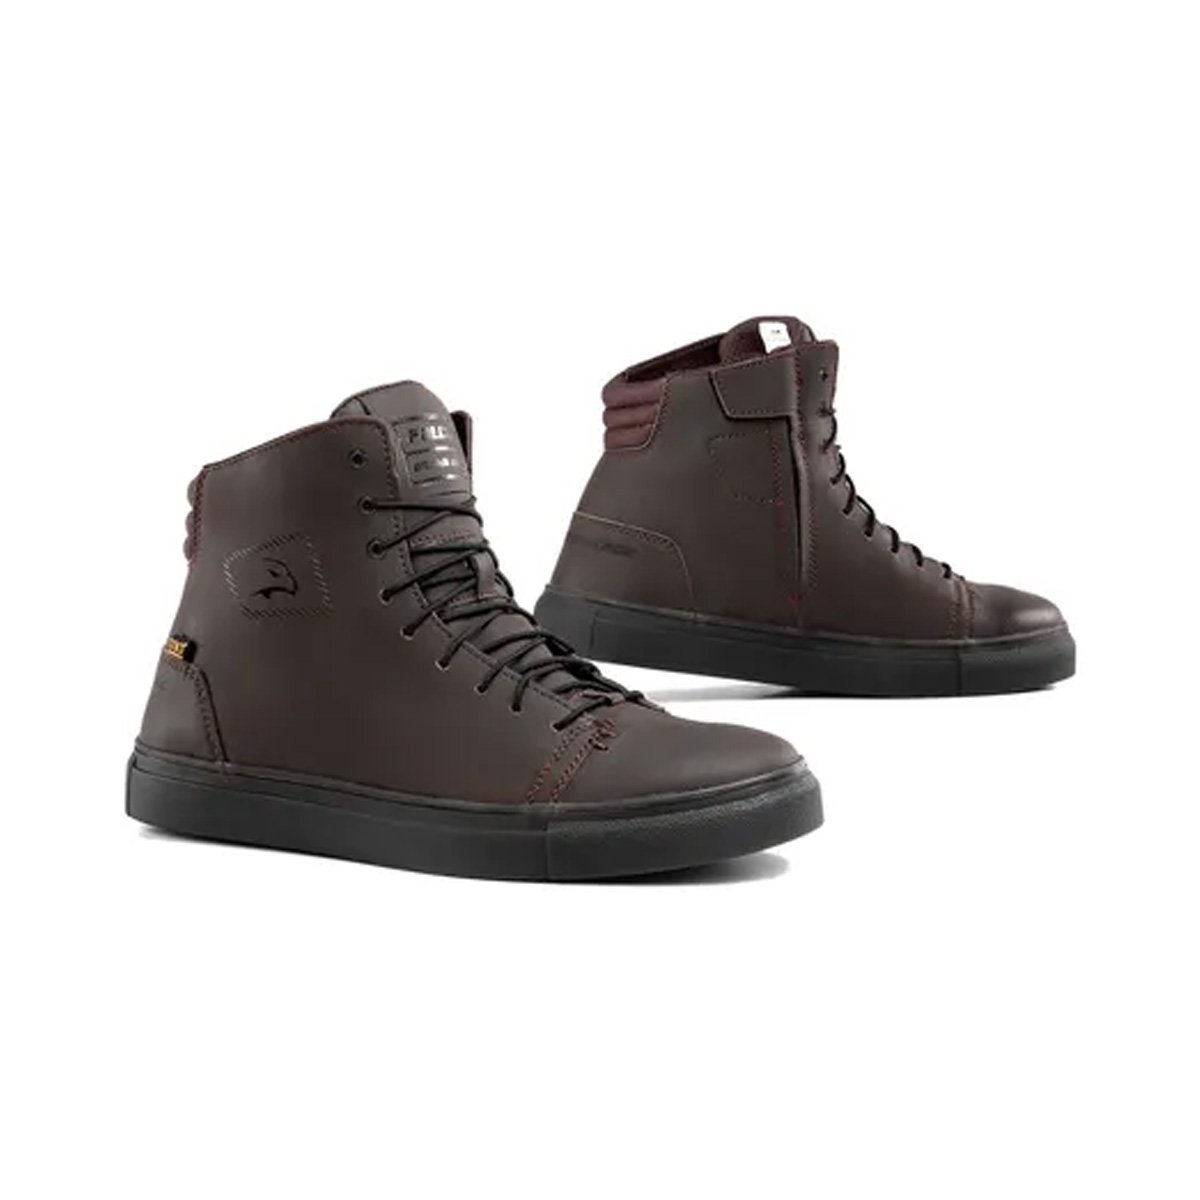 Image of Falco Nomad 2 Brown Size 44 ID 8052675494877